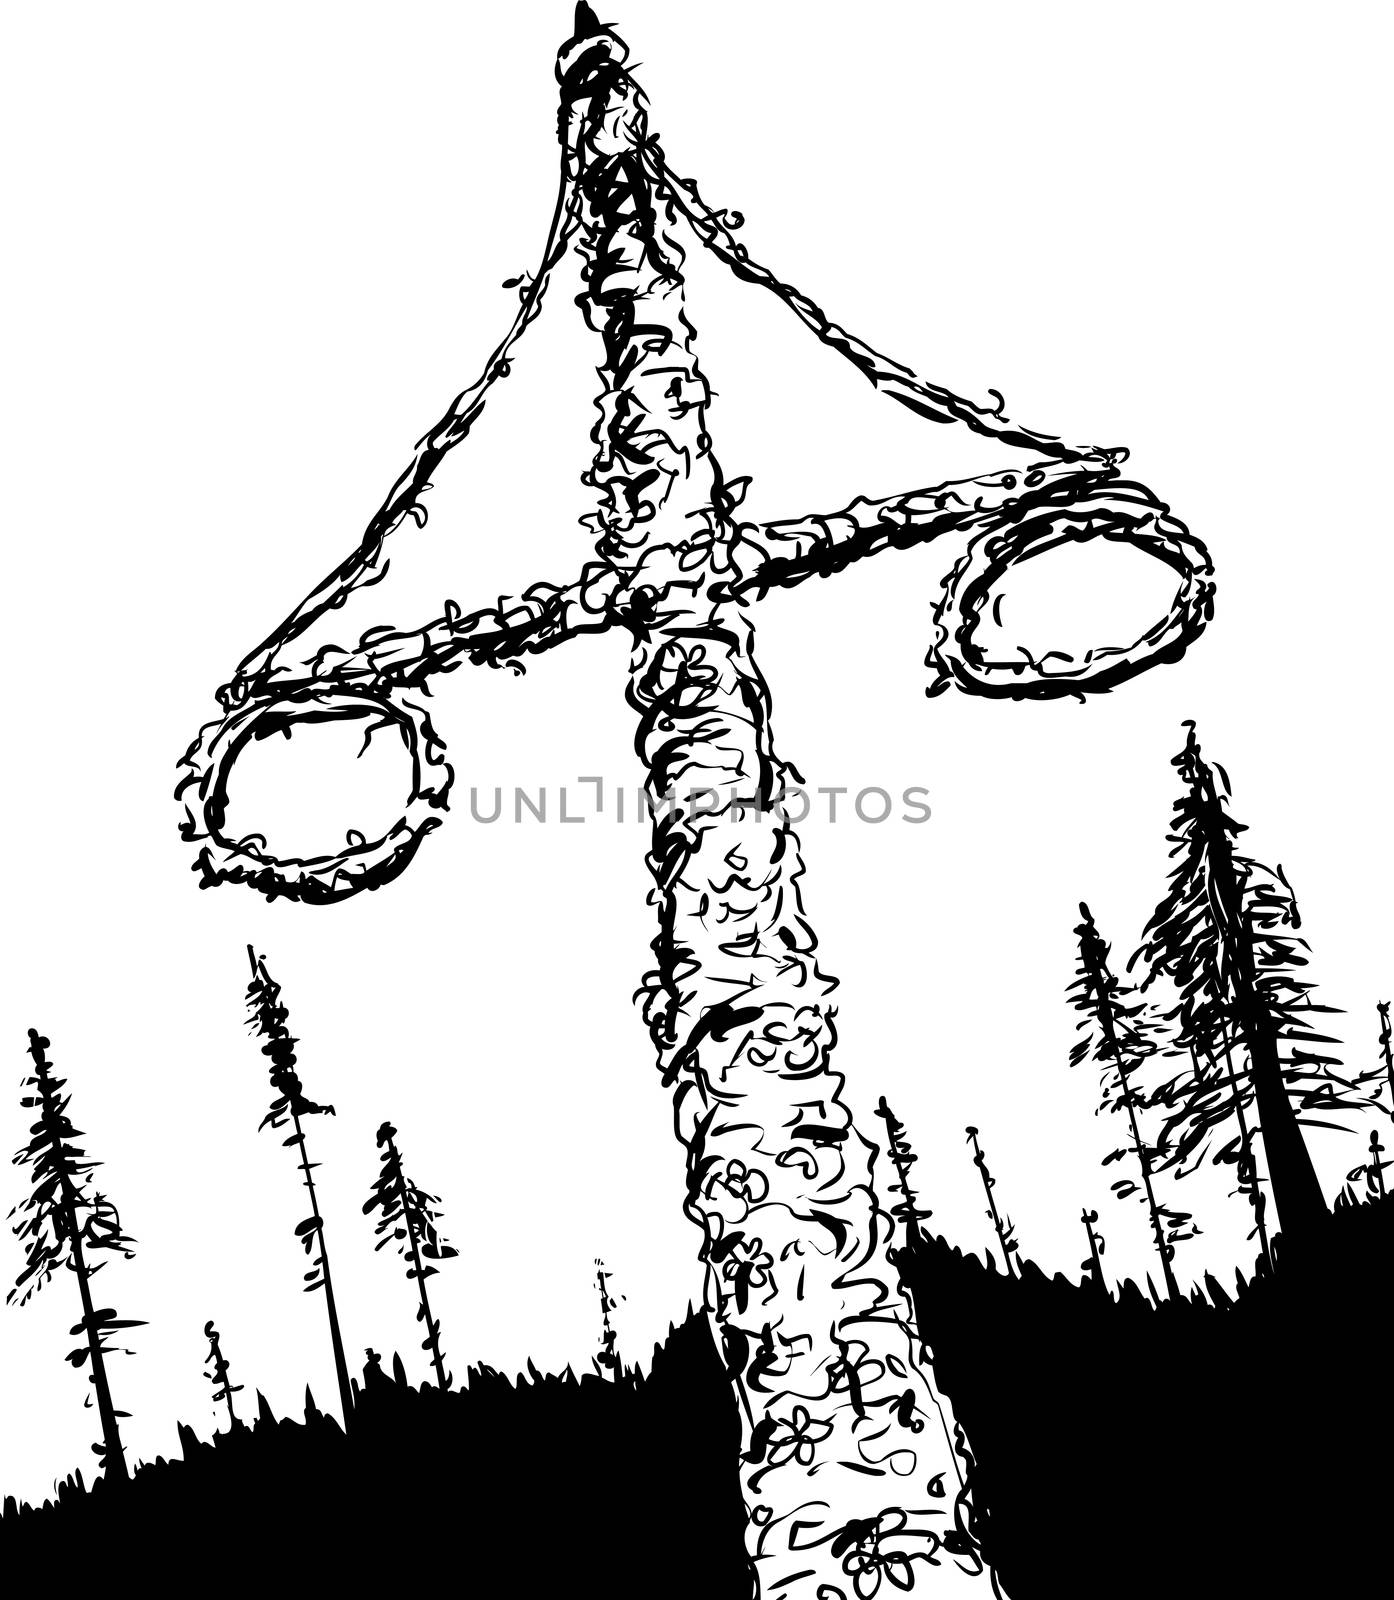 Outlined Swedish Midsummer Maypole and Woods by TheBlackRhino